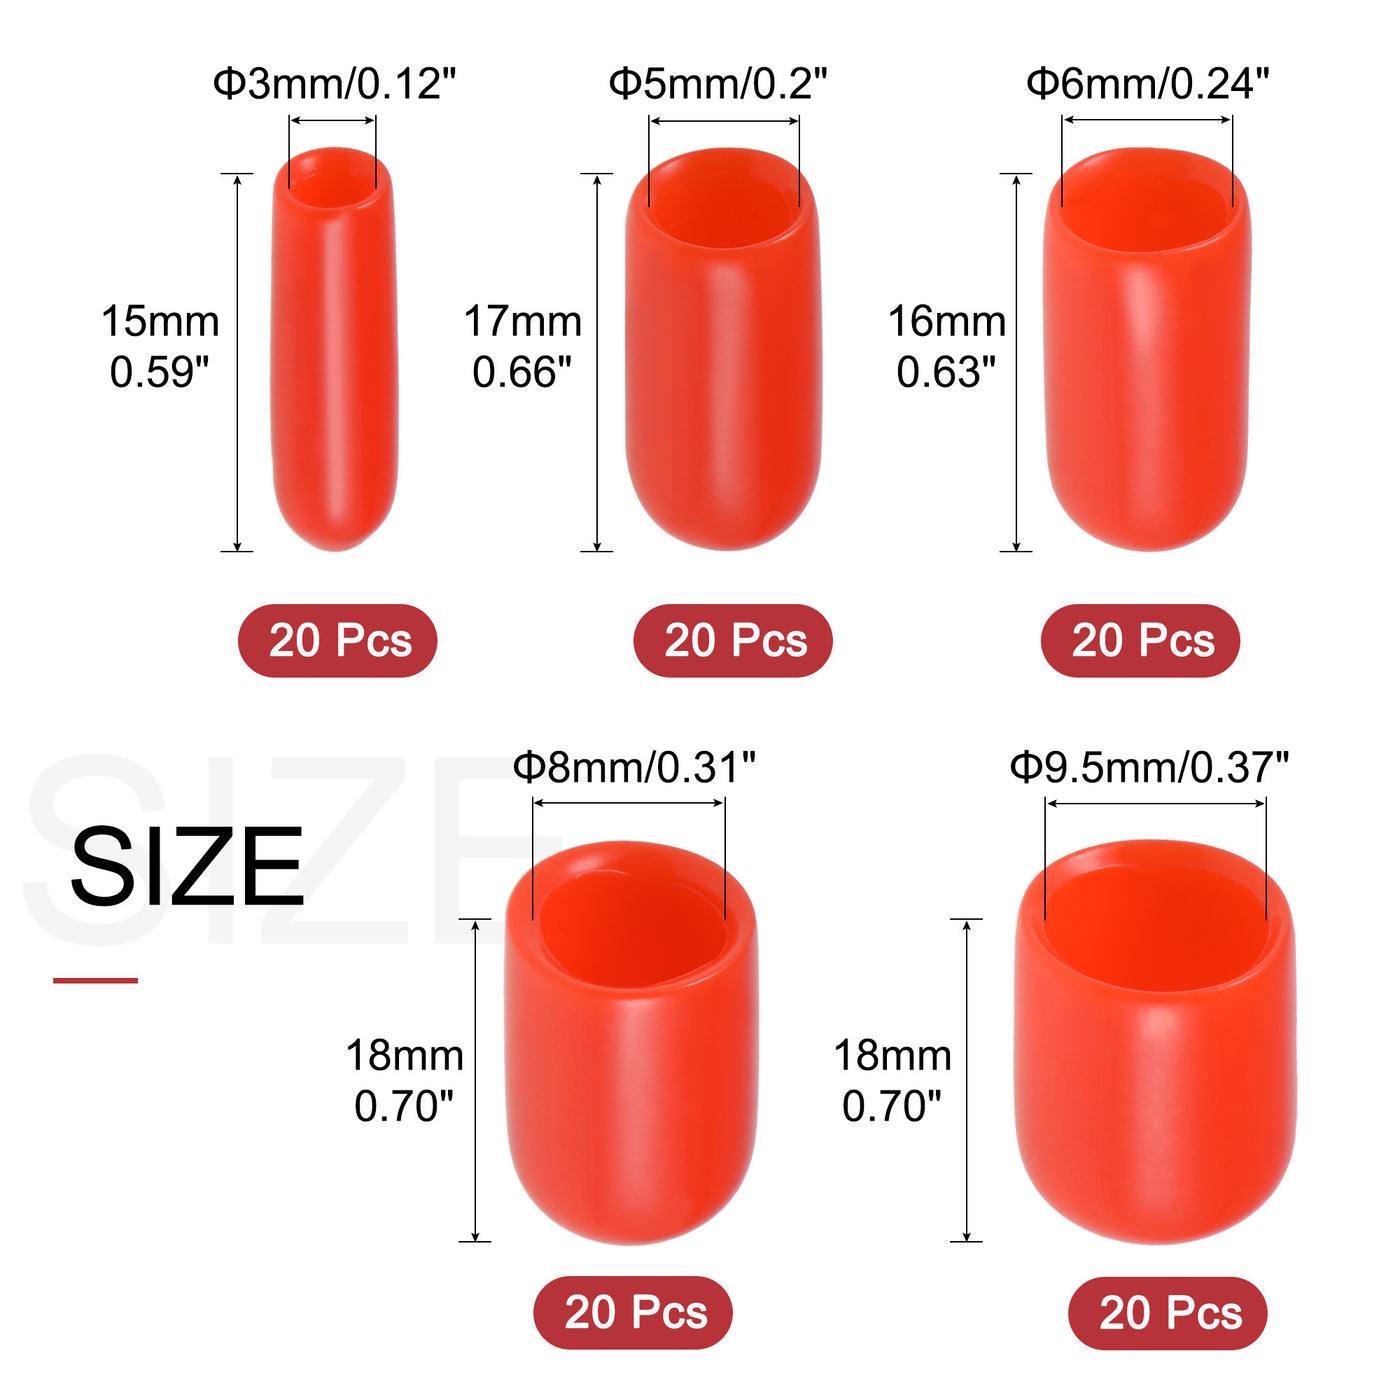 uxcell Uxcell 100pcs Round Rubber End Caps 1/8" 3/16" 1/4" 5/16" 3/8" Red Vinyl Cover Screw Thread Protectors Assortment Kit